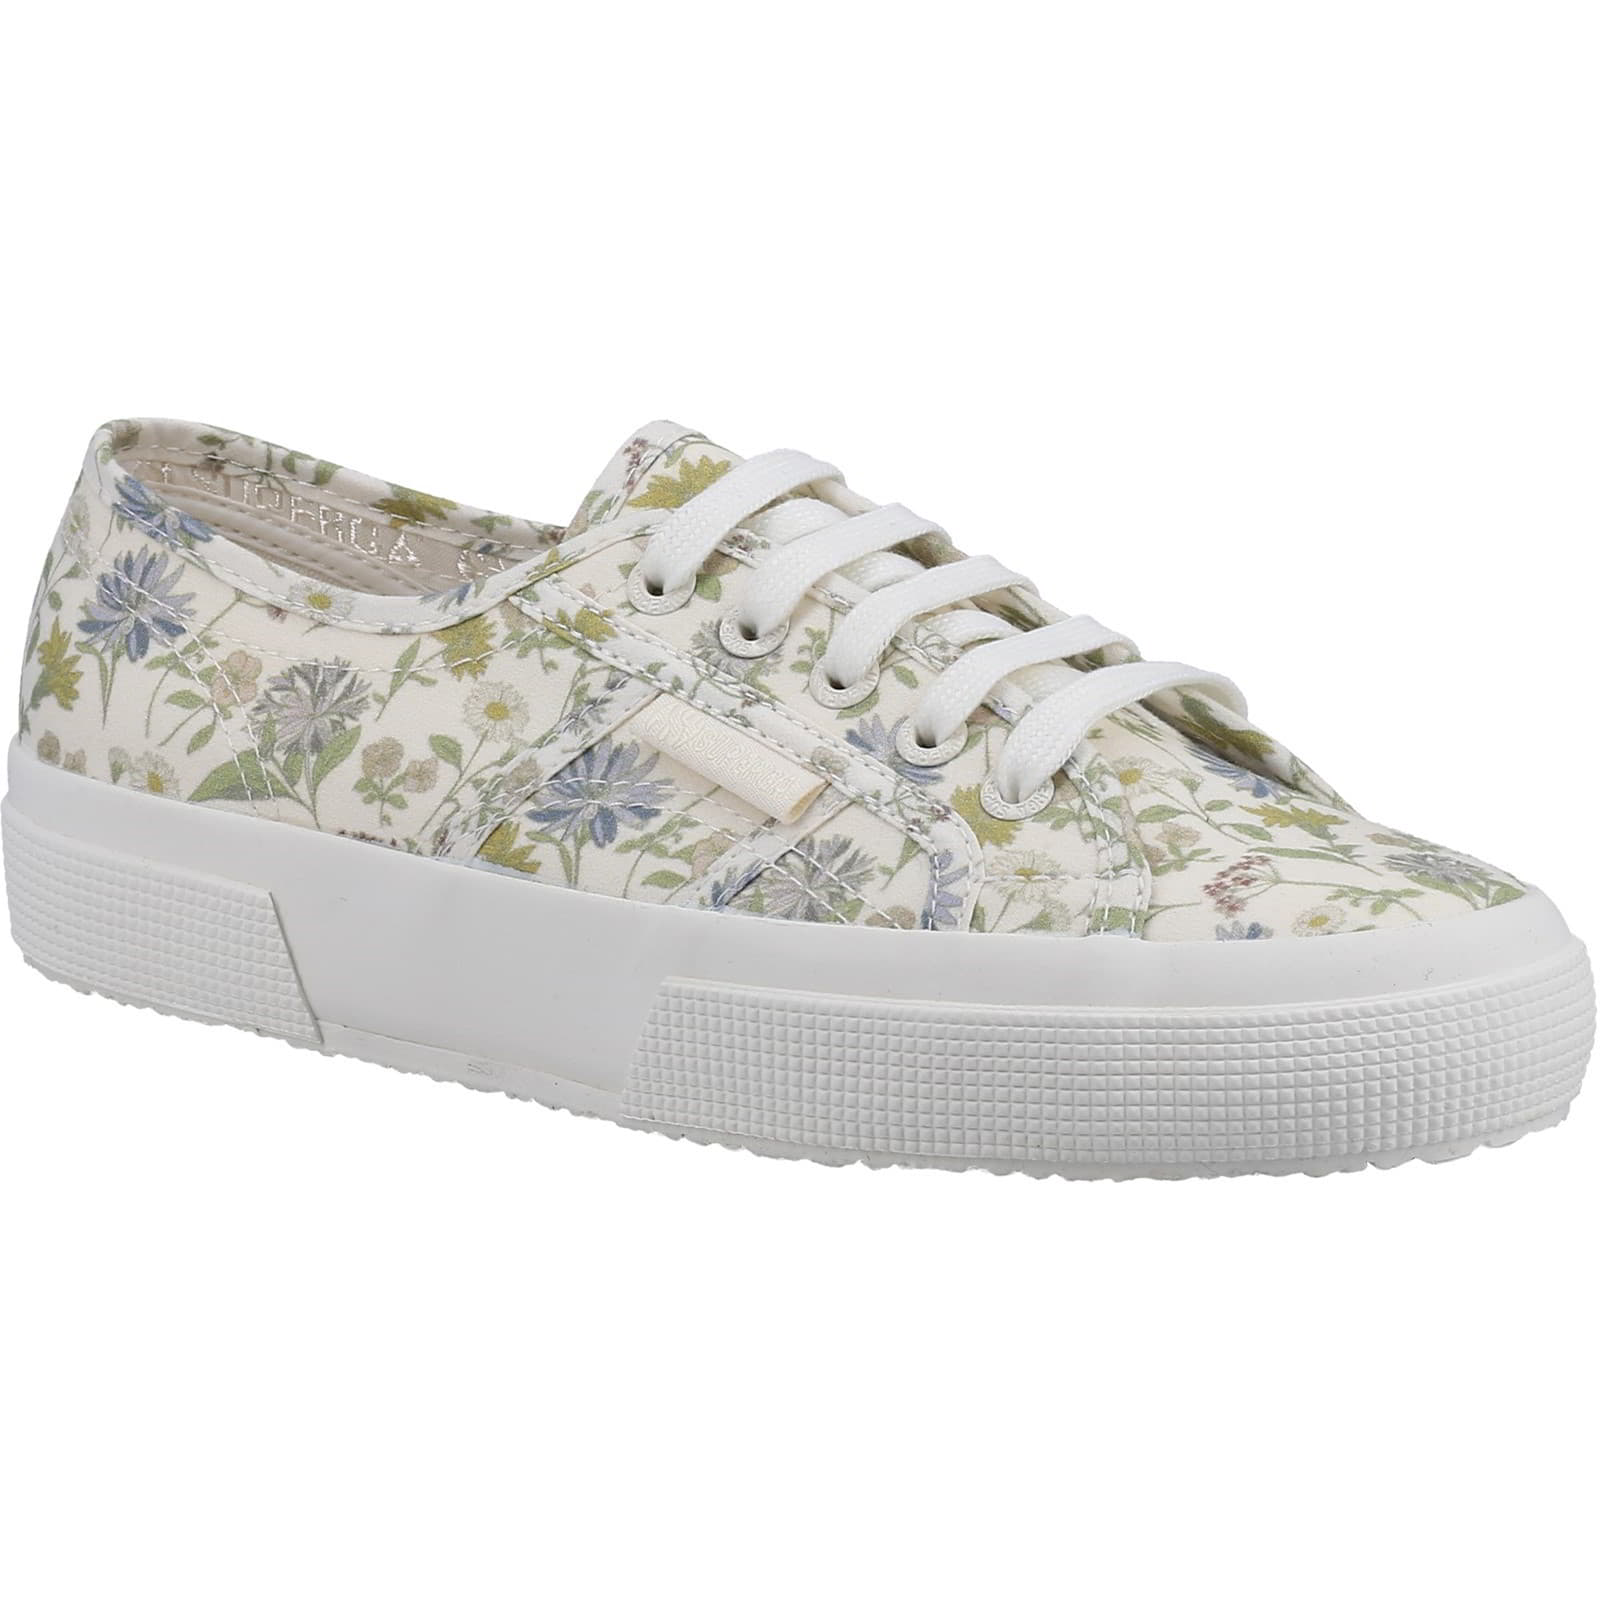 Superga Women's 2750 Floral Print Lace Up Trainers Shoes - UK 3